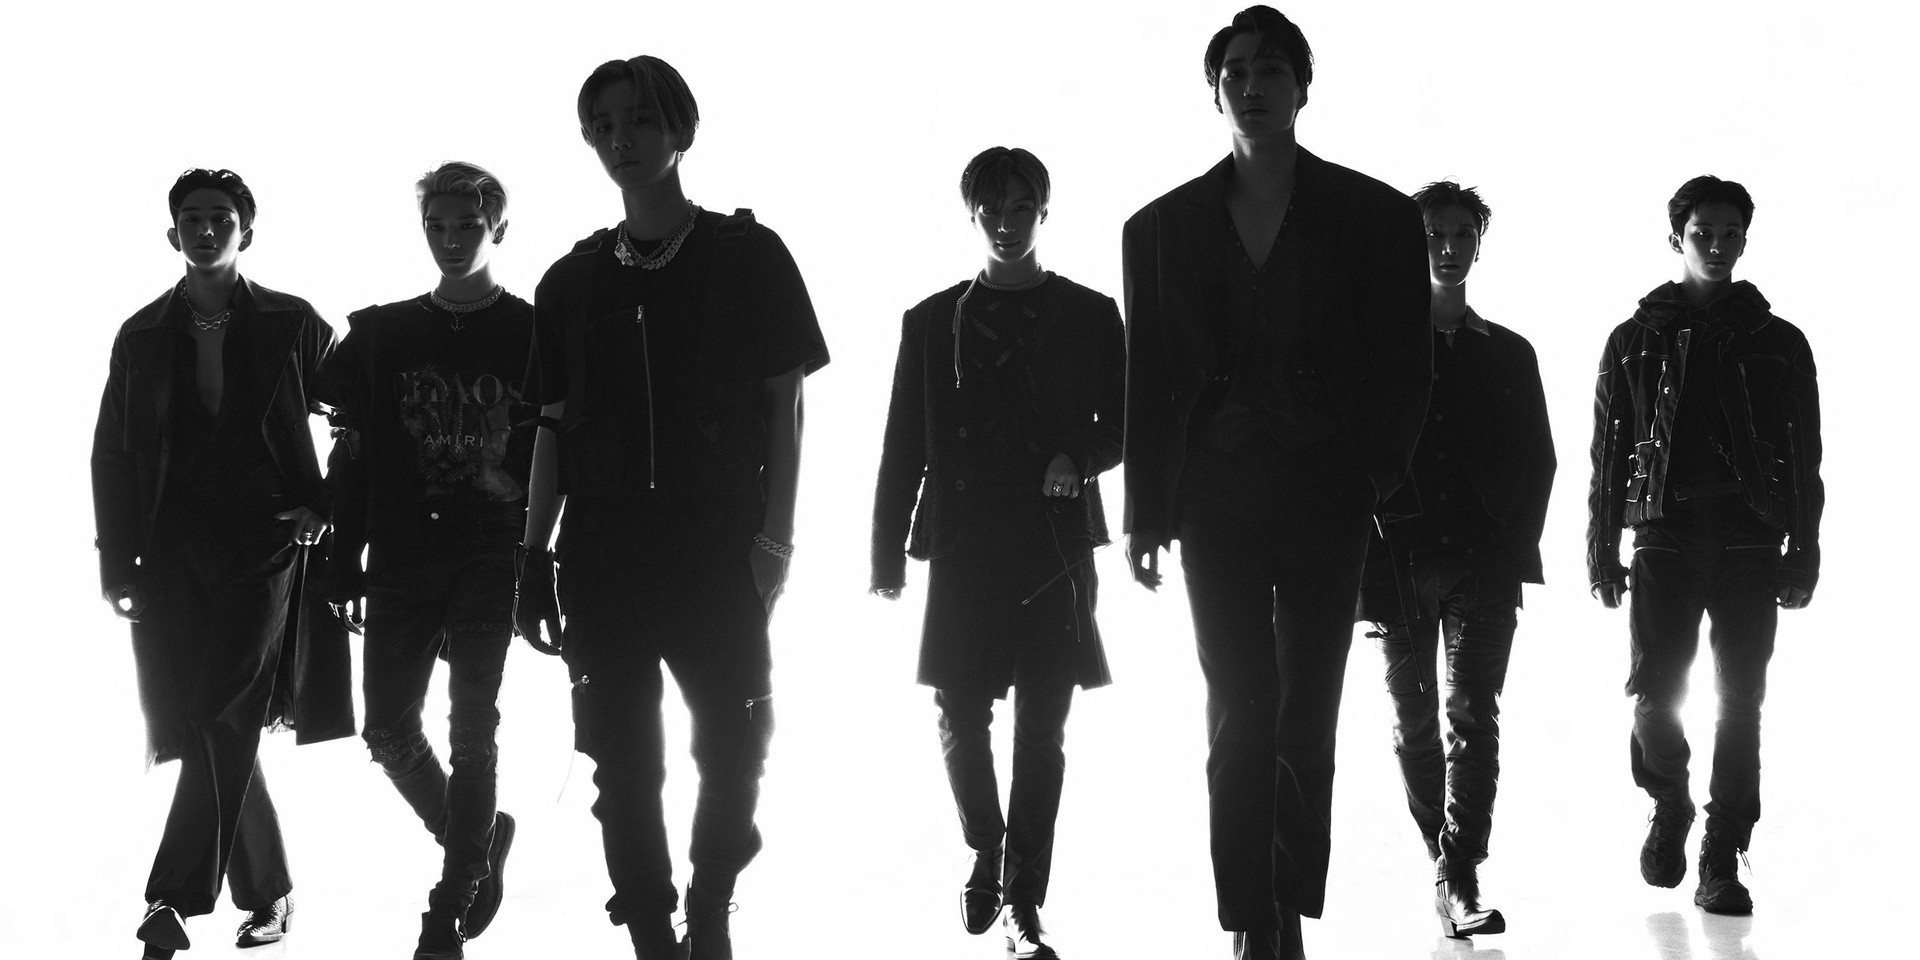 SuperM, K-pop's newest super group, announce details of upcoming debut EP